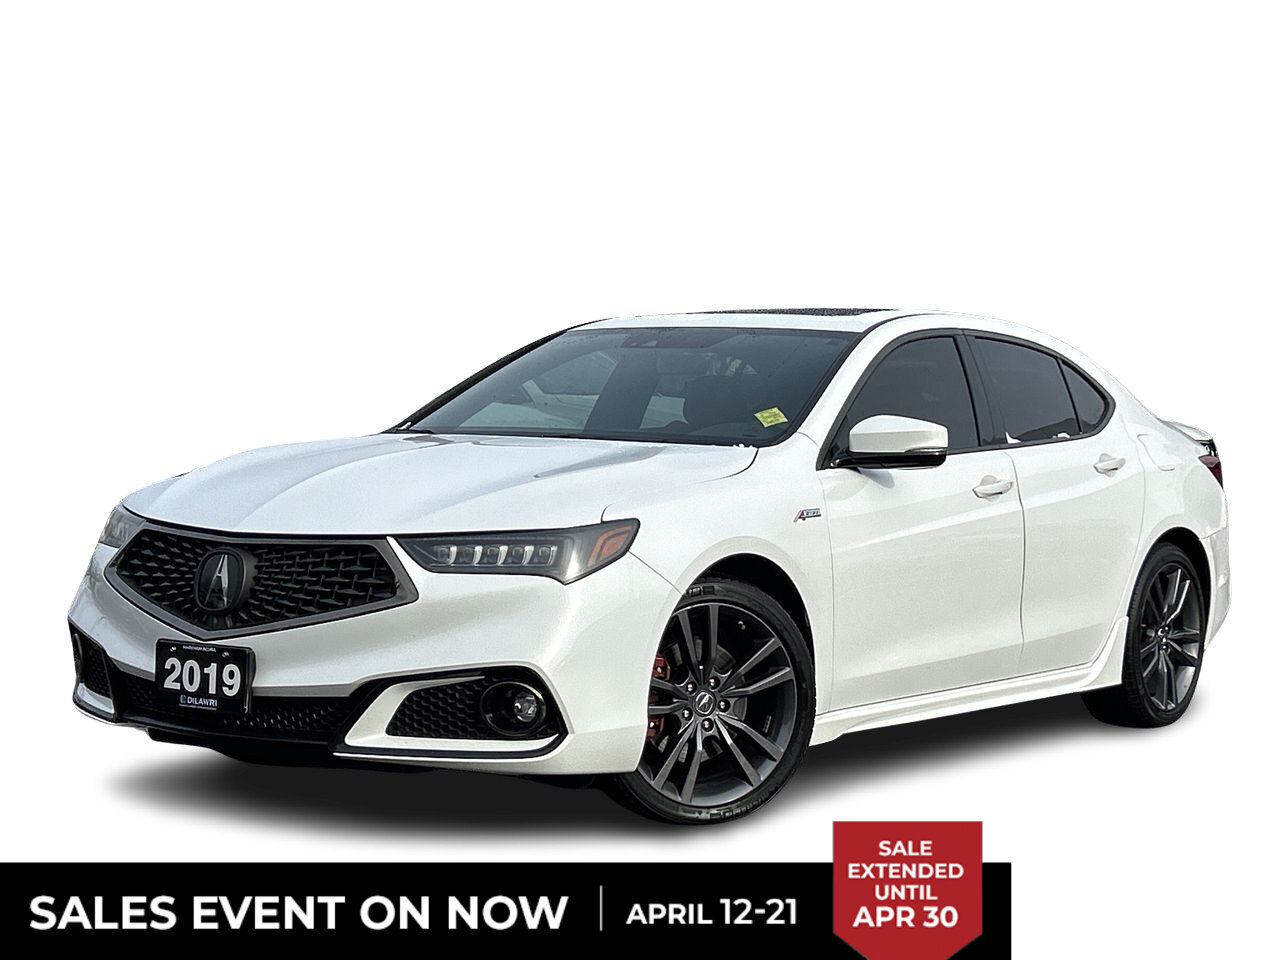 2019 Acura TLX 3.5L SH-AWD Tech A-Spec Red Lthr | CarPlay/Android